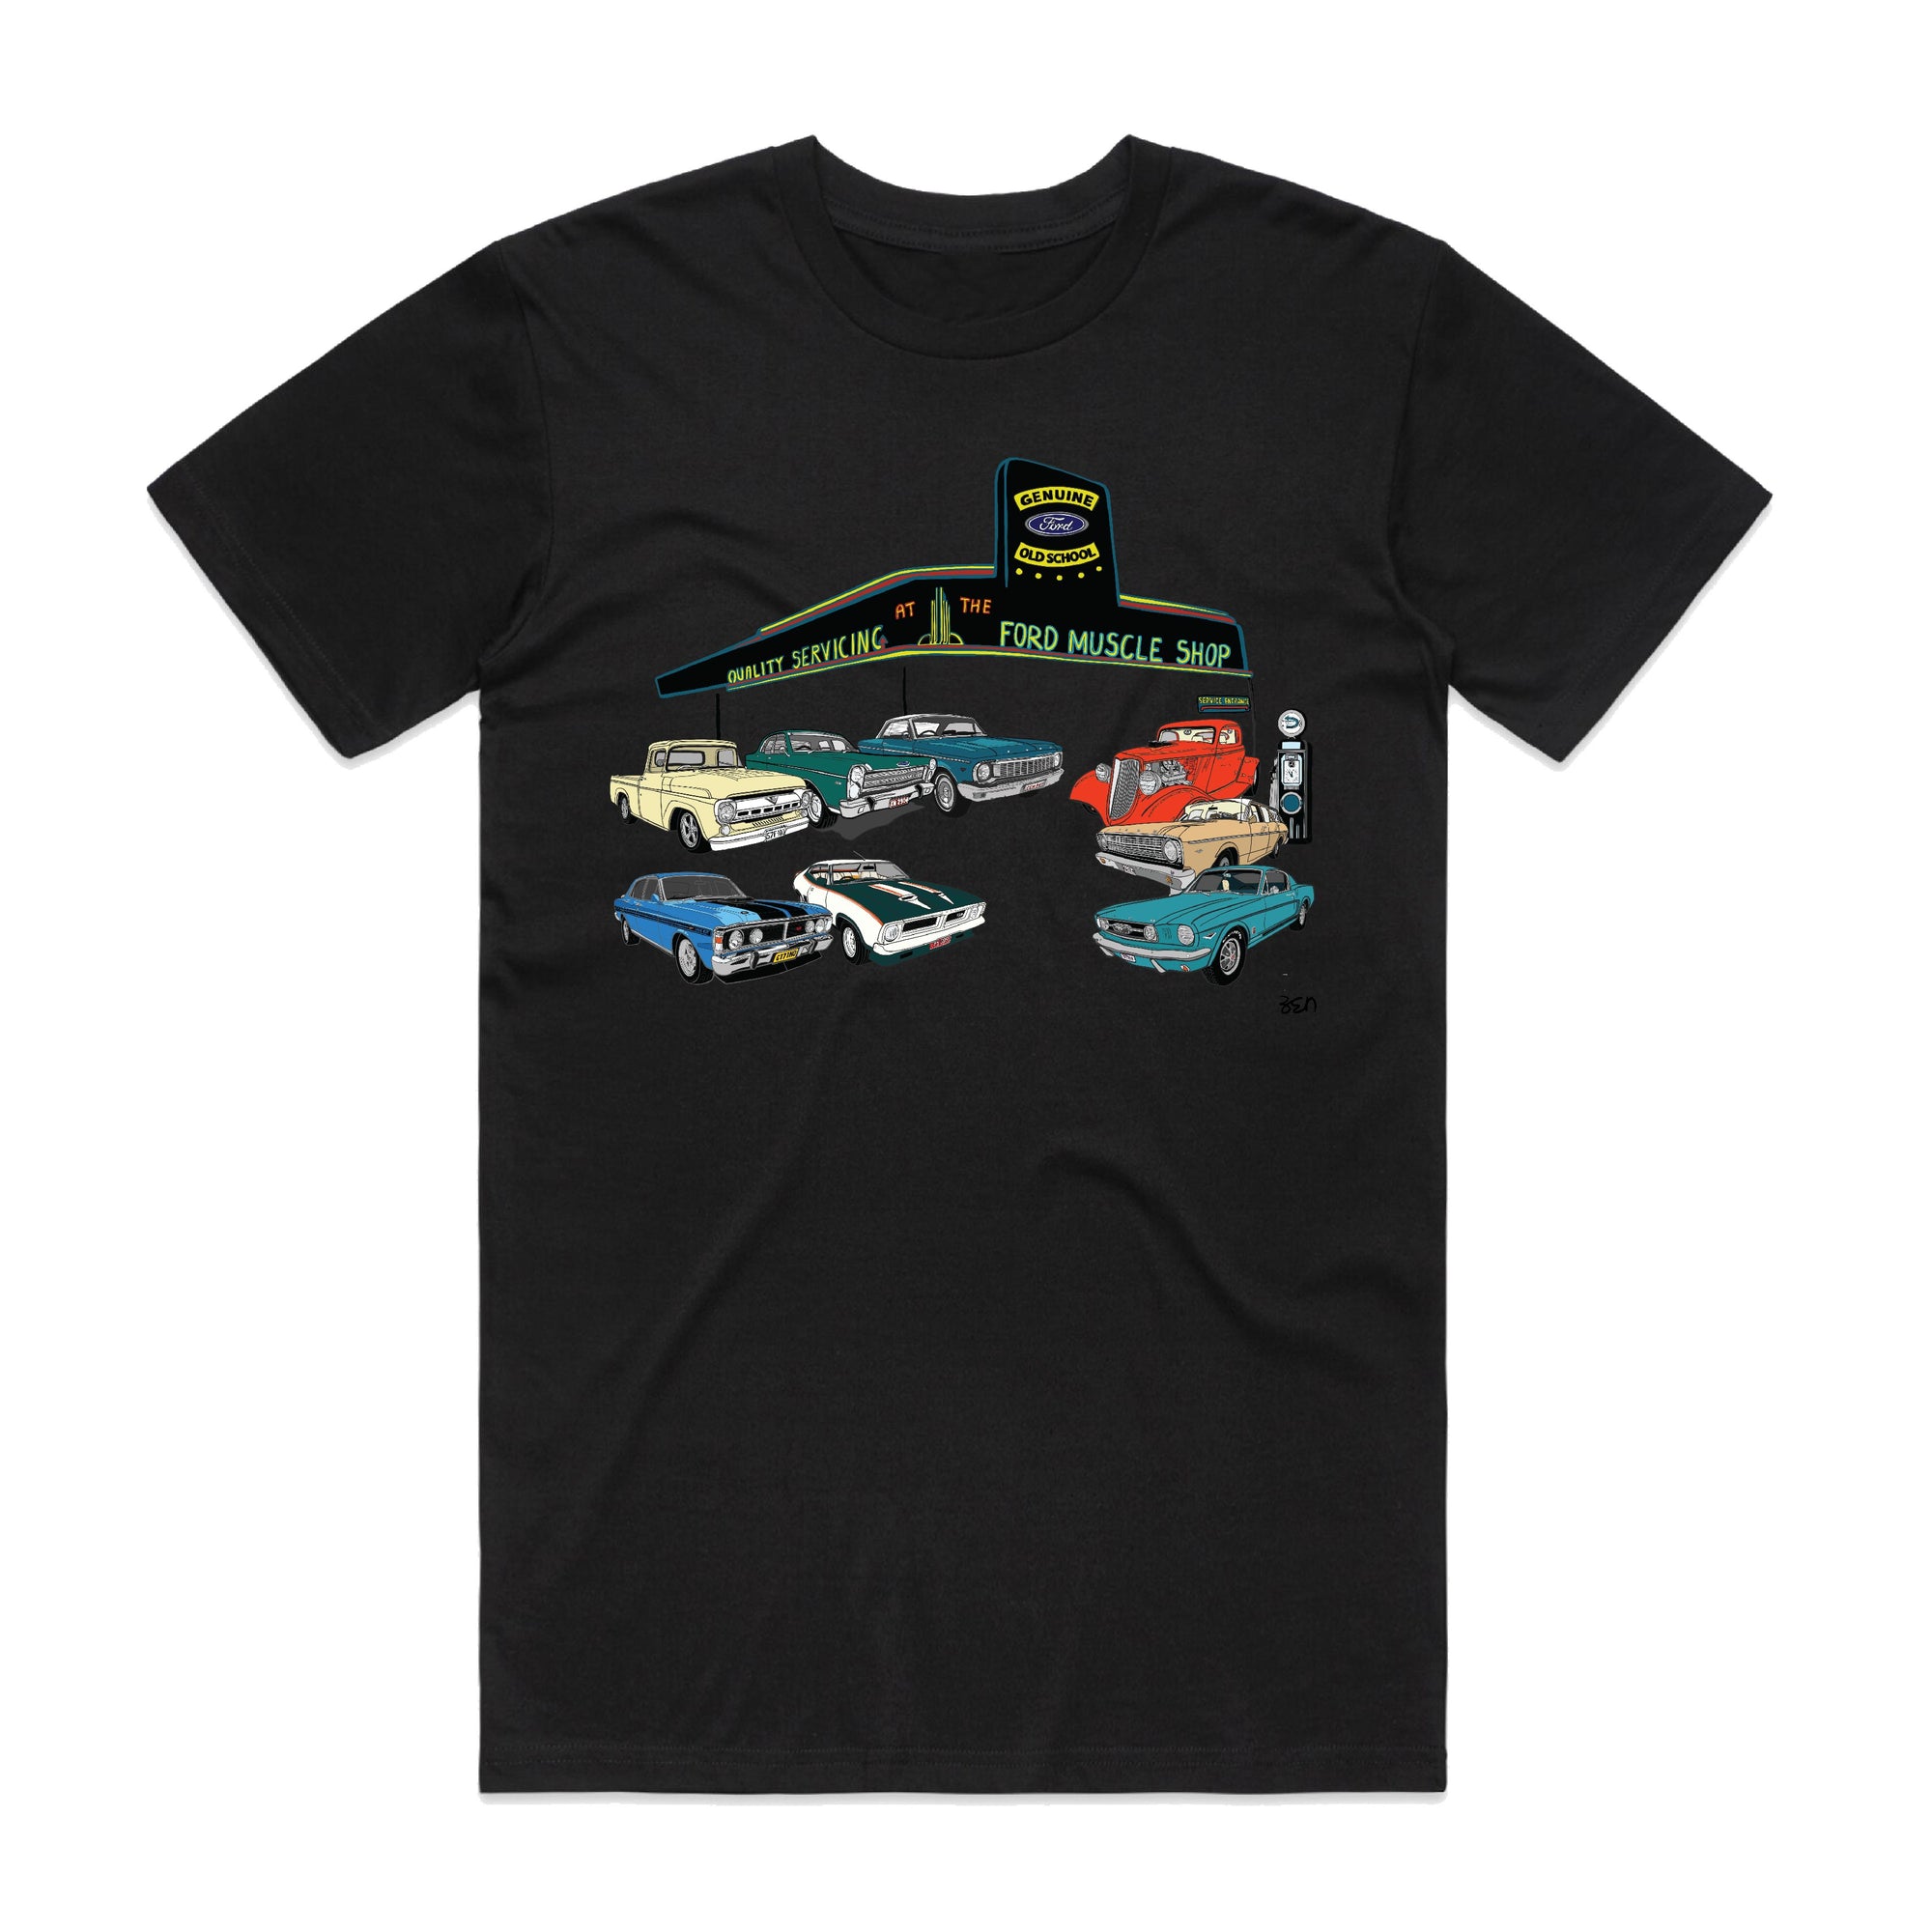 'THE FORD MUSCLE SHOP' OLD SCHOOL GARAGE MENS TEE